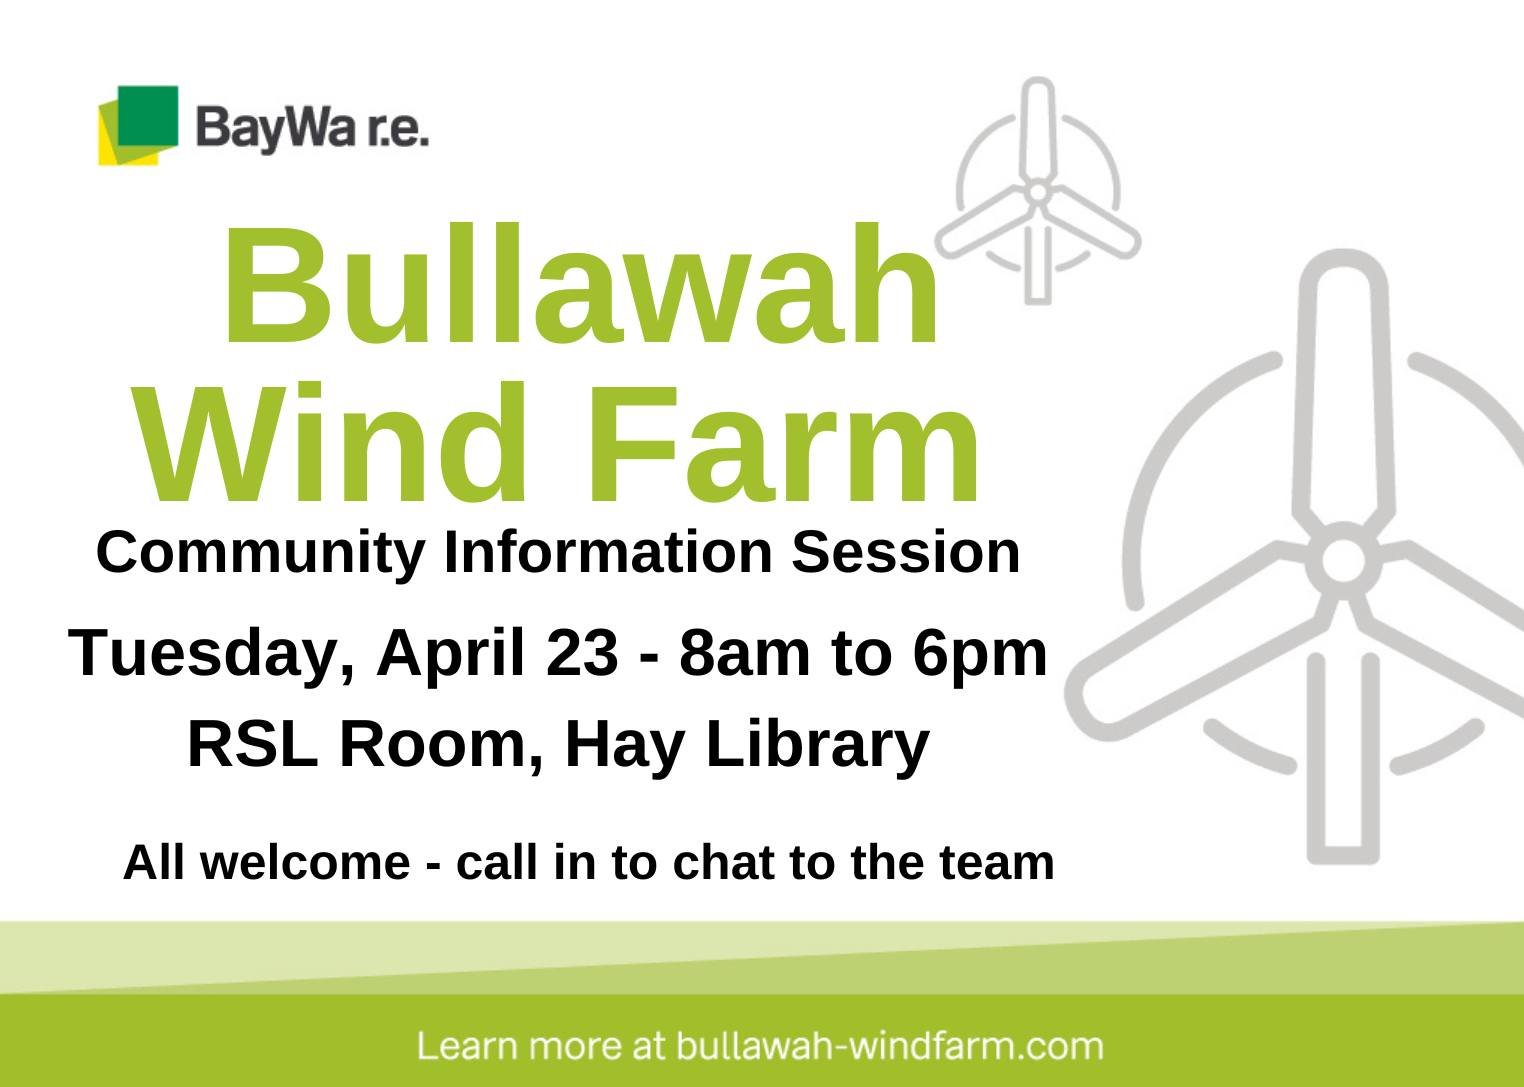 SPONSORED POST
BayWa is hosting a consultation session, and all are welcome. Call in to chat about the Bullawah Wind Farm with the team.